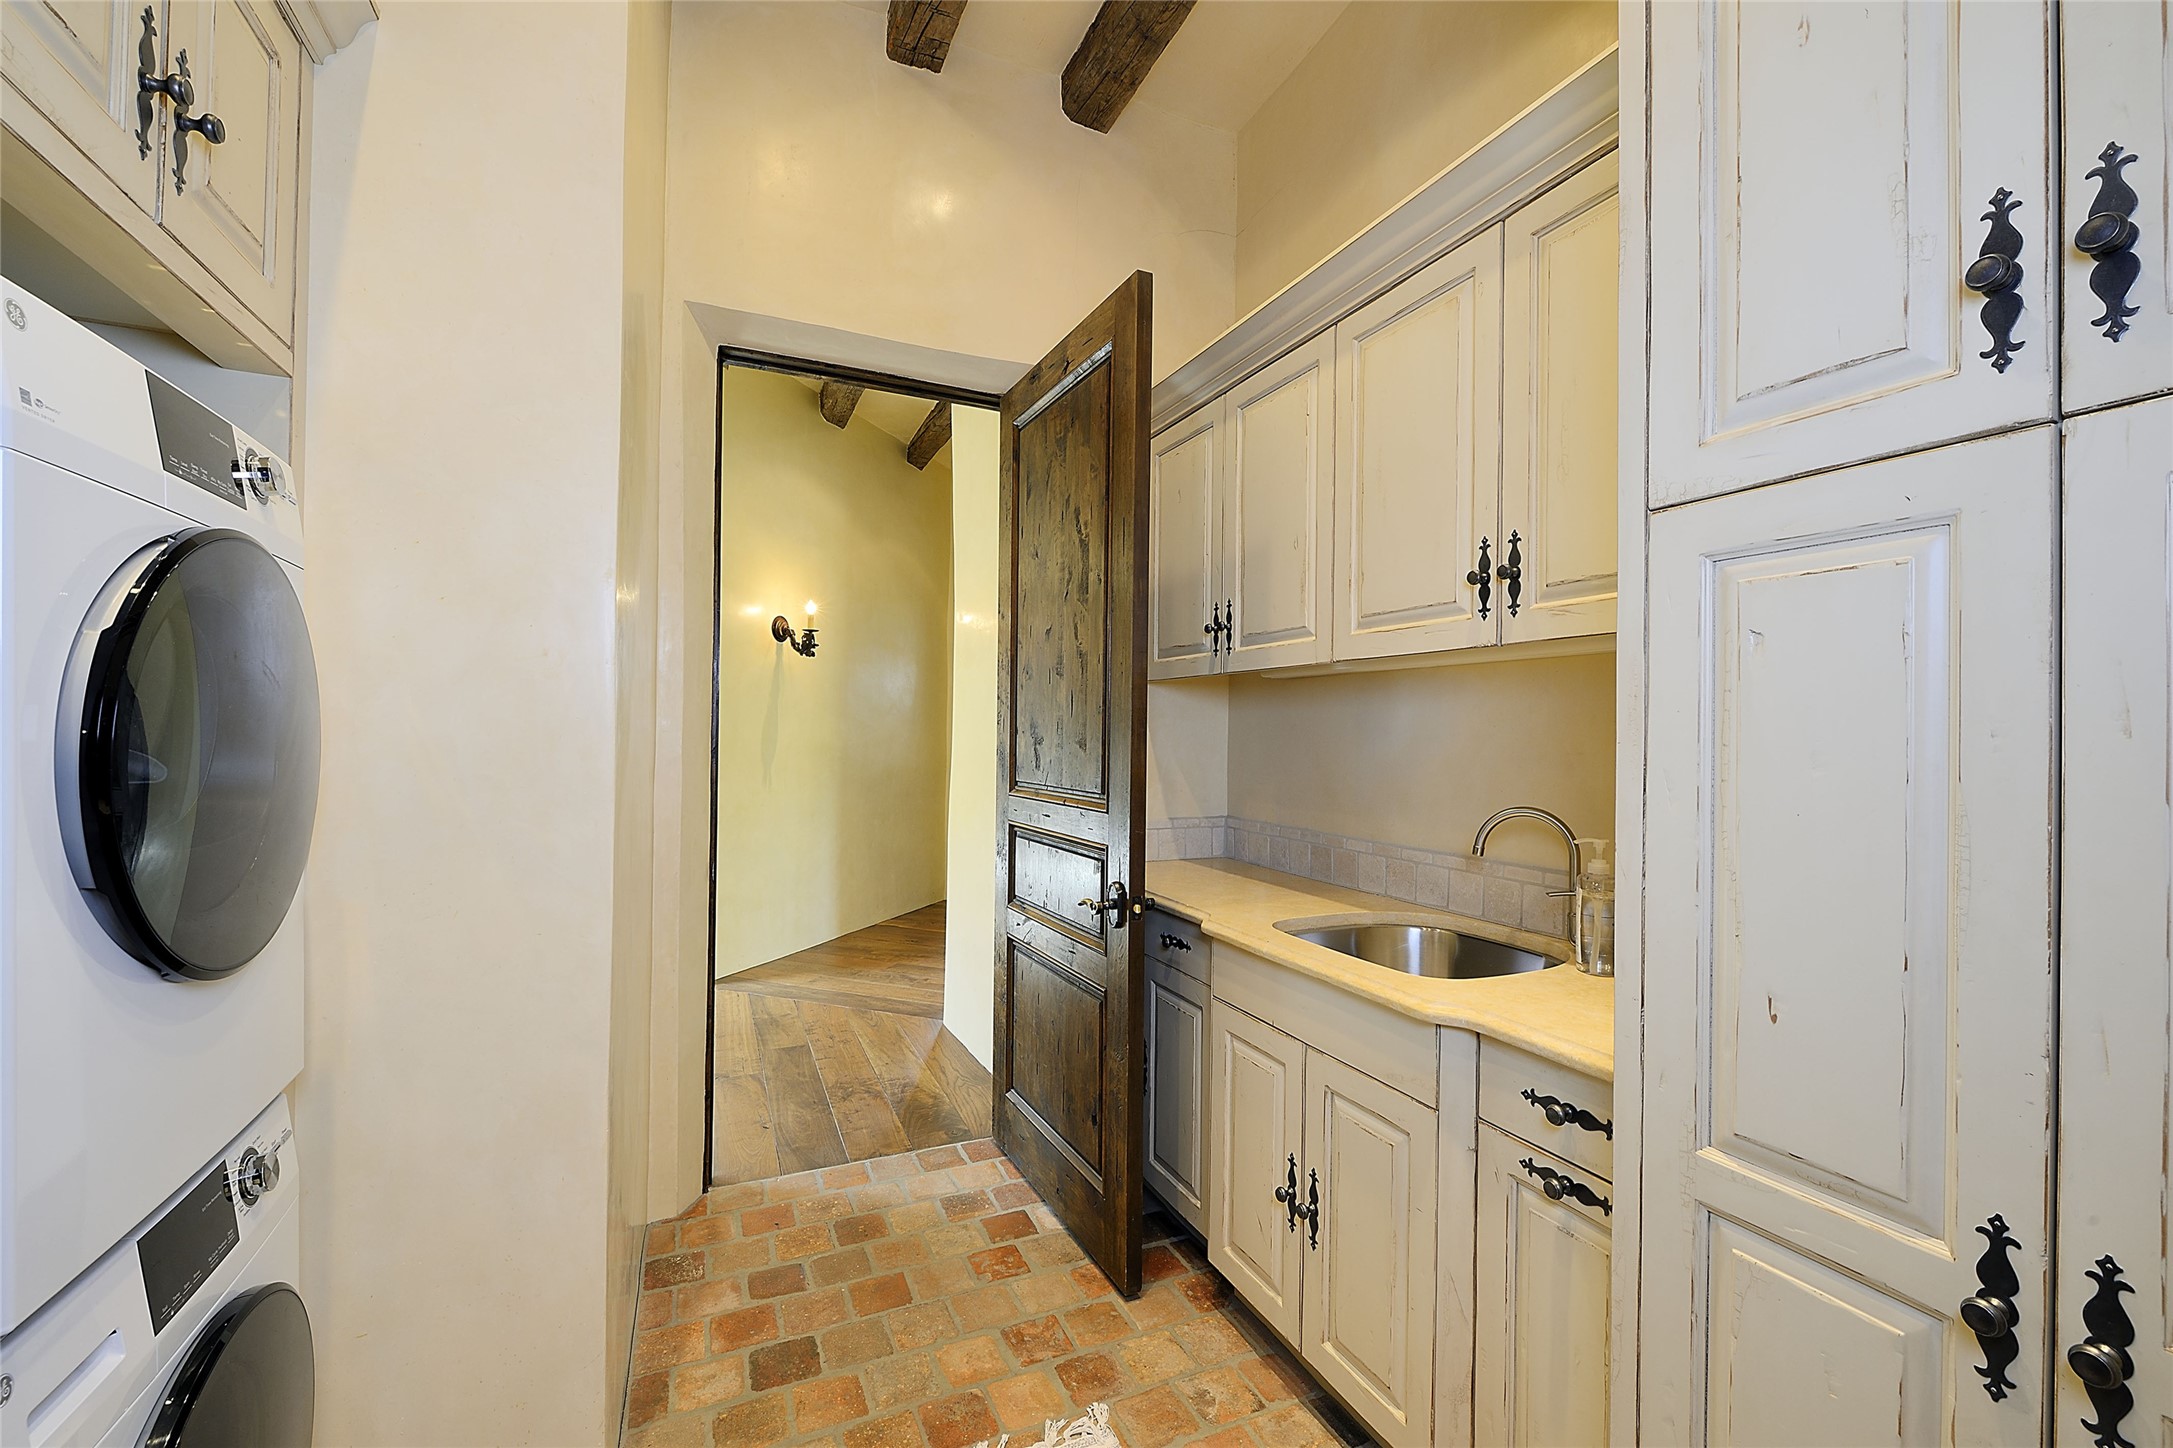 52 Lodge Trail, Santa Fe, New Mexico 87506, 3 Bedrooms Bedrooms, ,4 BathroomsBathrooms,Residential,For Sale,52 Lodge Trail,202401510